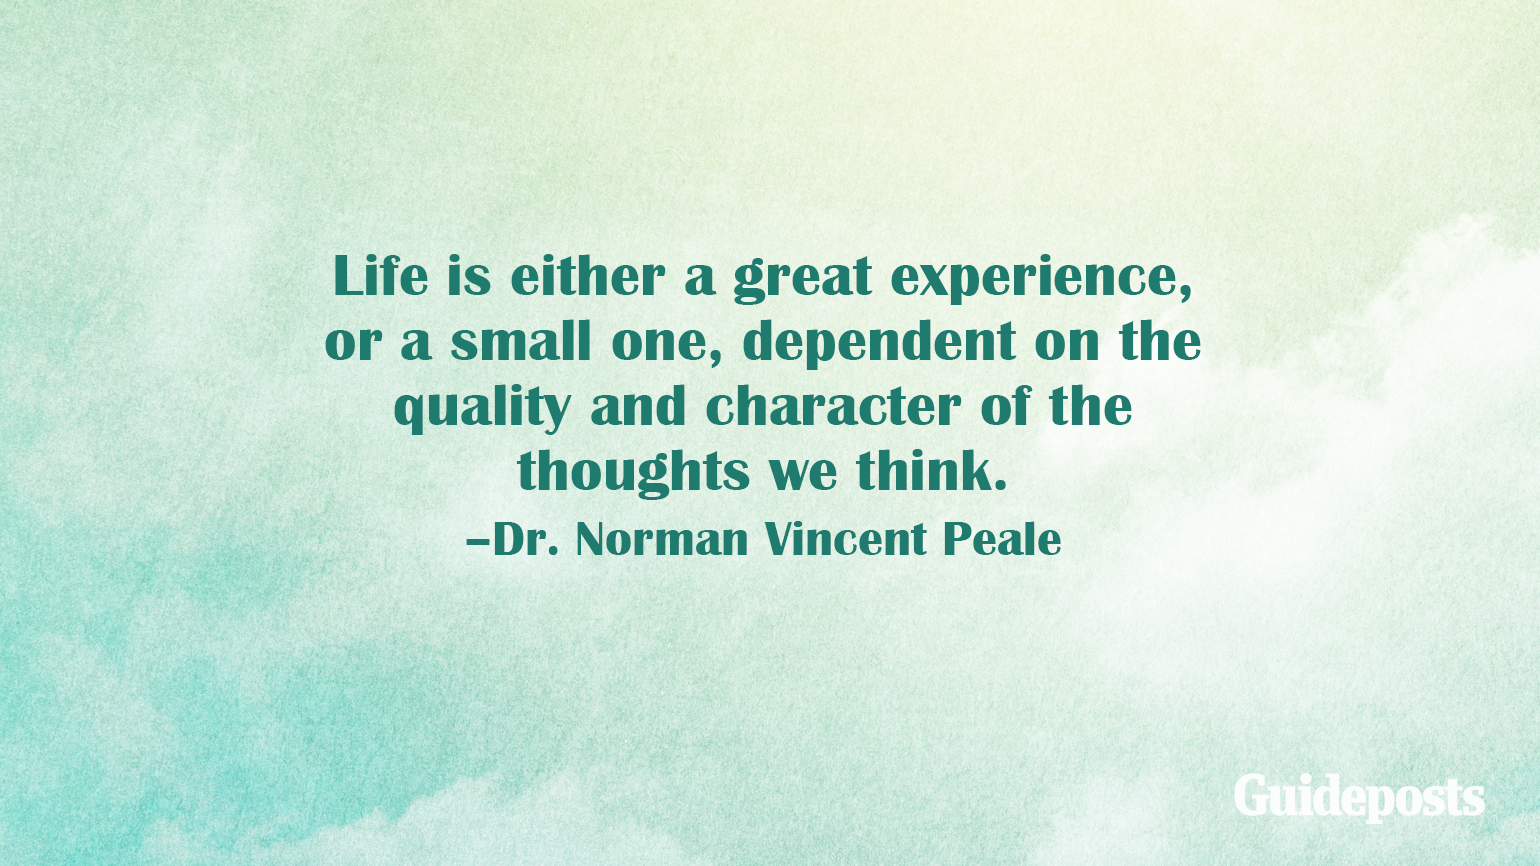 Life is either a great experience, or a small one, dependent on the quality and character of the thoughts we think. –Dr. Norman Vincent Peale